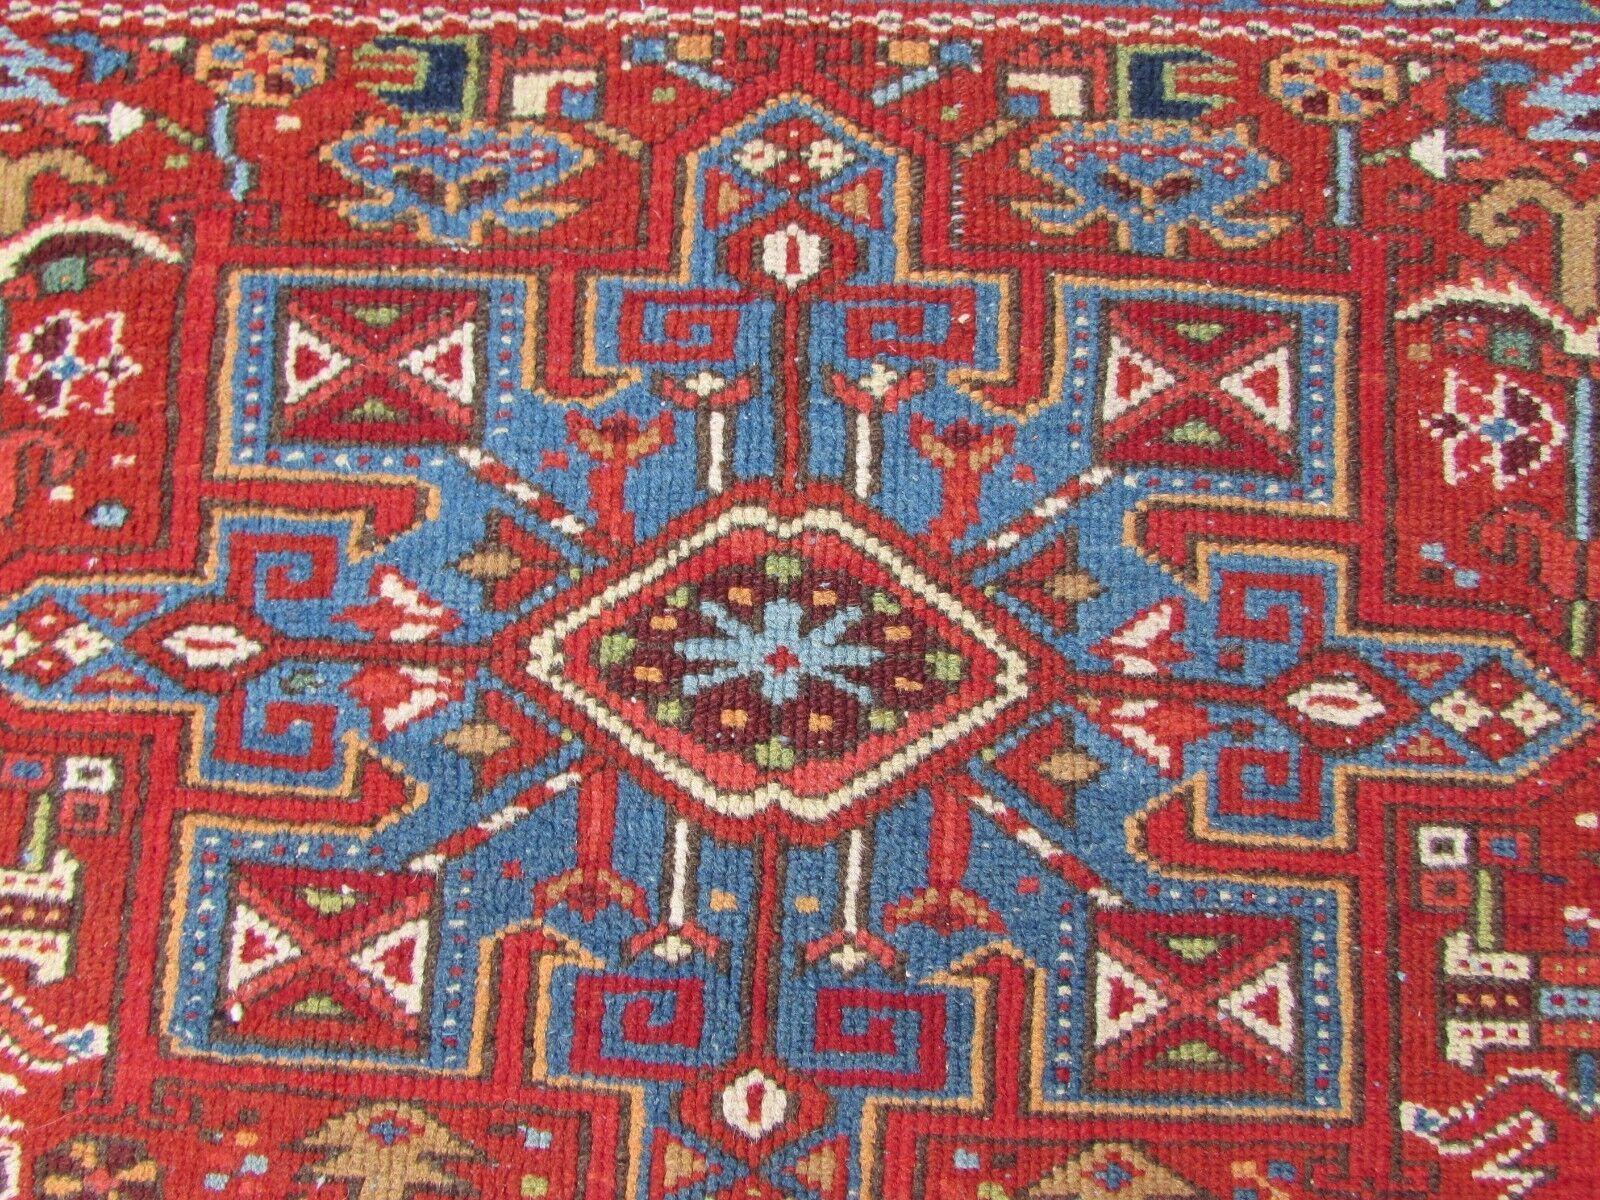 Early 20th Century  Handmade Antique Persian Style Karajeh Rug 4.6' x 6', 1920s - 1Q56 For Sale